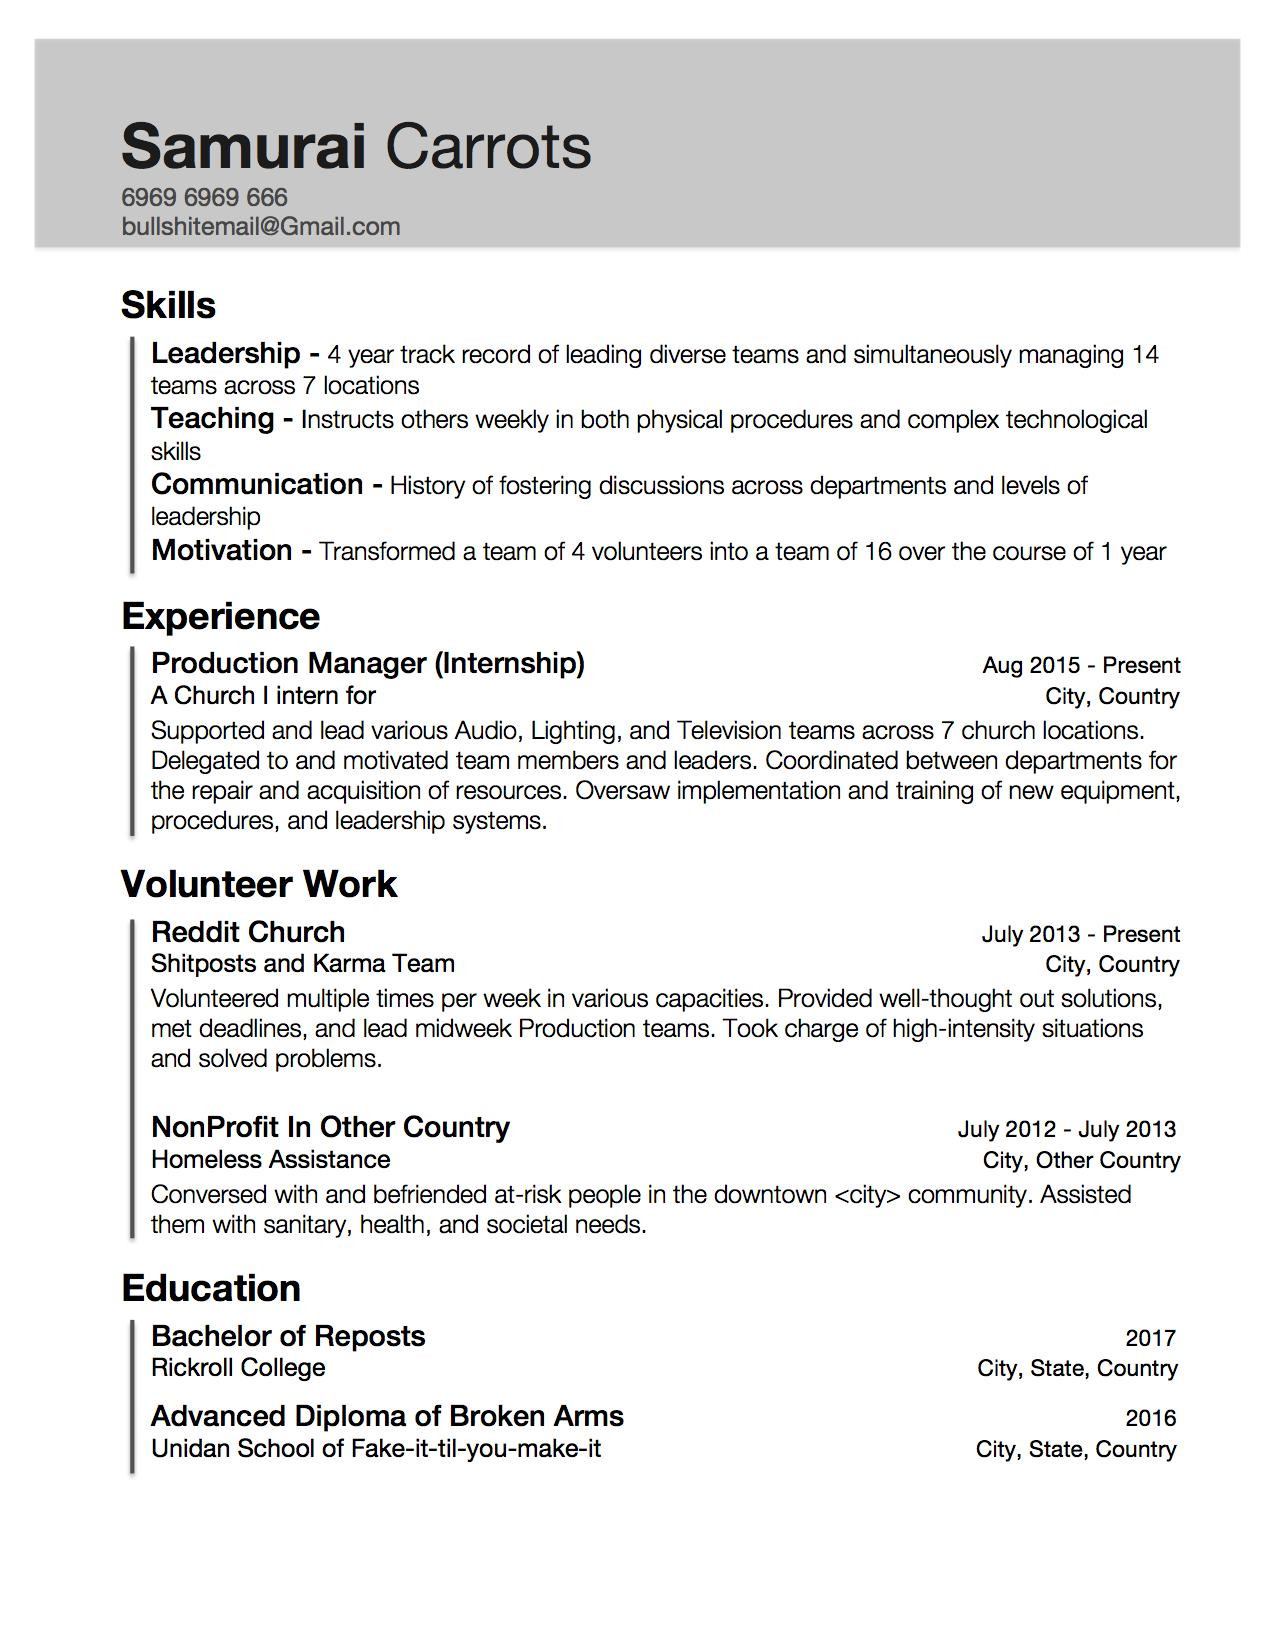 resume with little work experience but skills